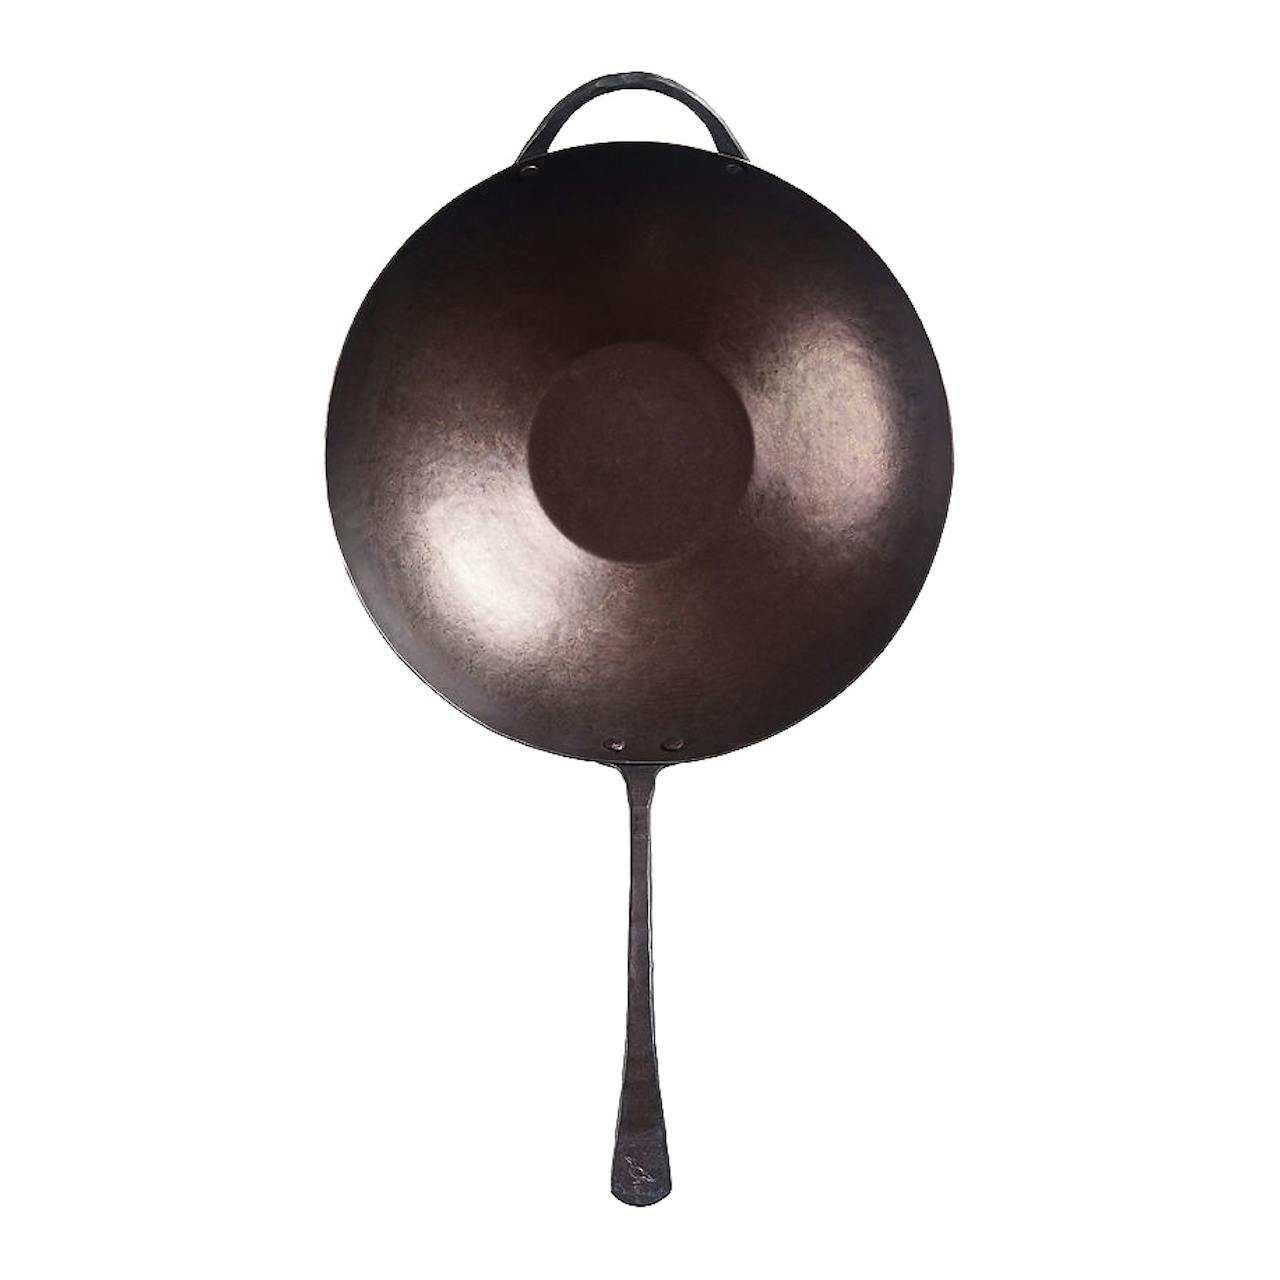 The Hand-Forged Carbon Steel Set – Smithey Ironware